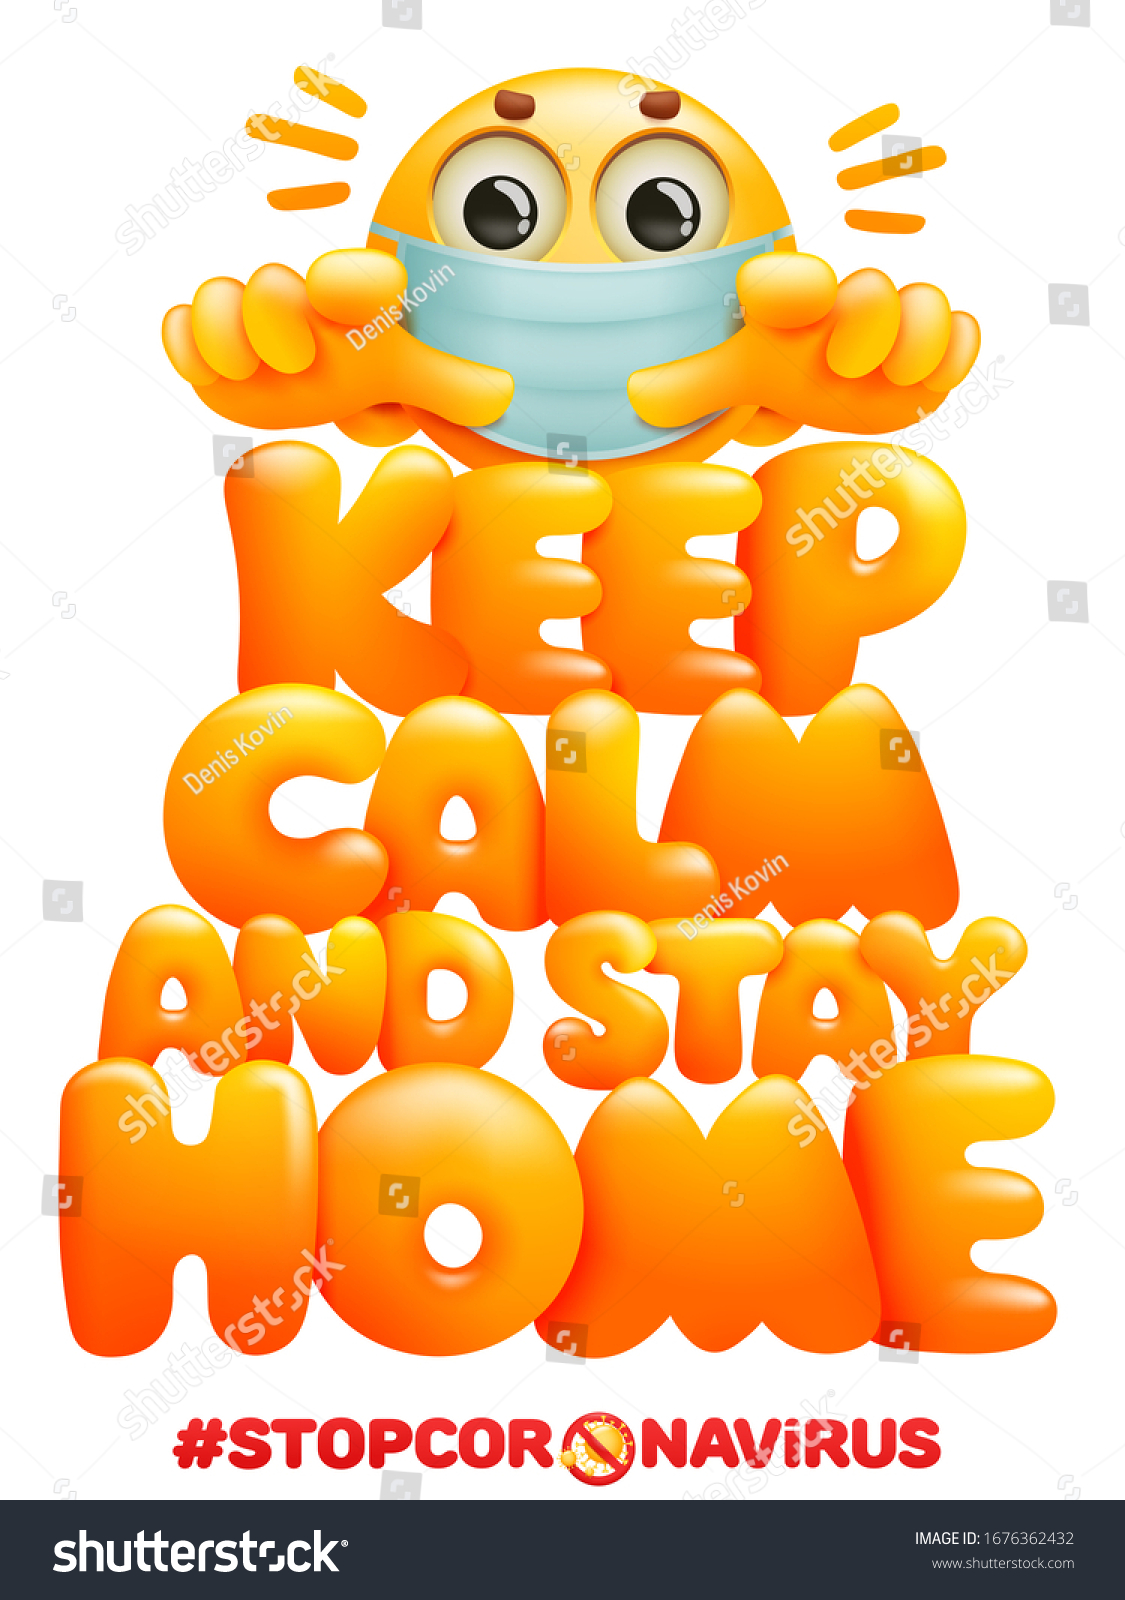 Keep Calm Stay Home Postr Template Stock Vector (Royalty Free) 1676362432